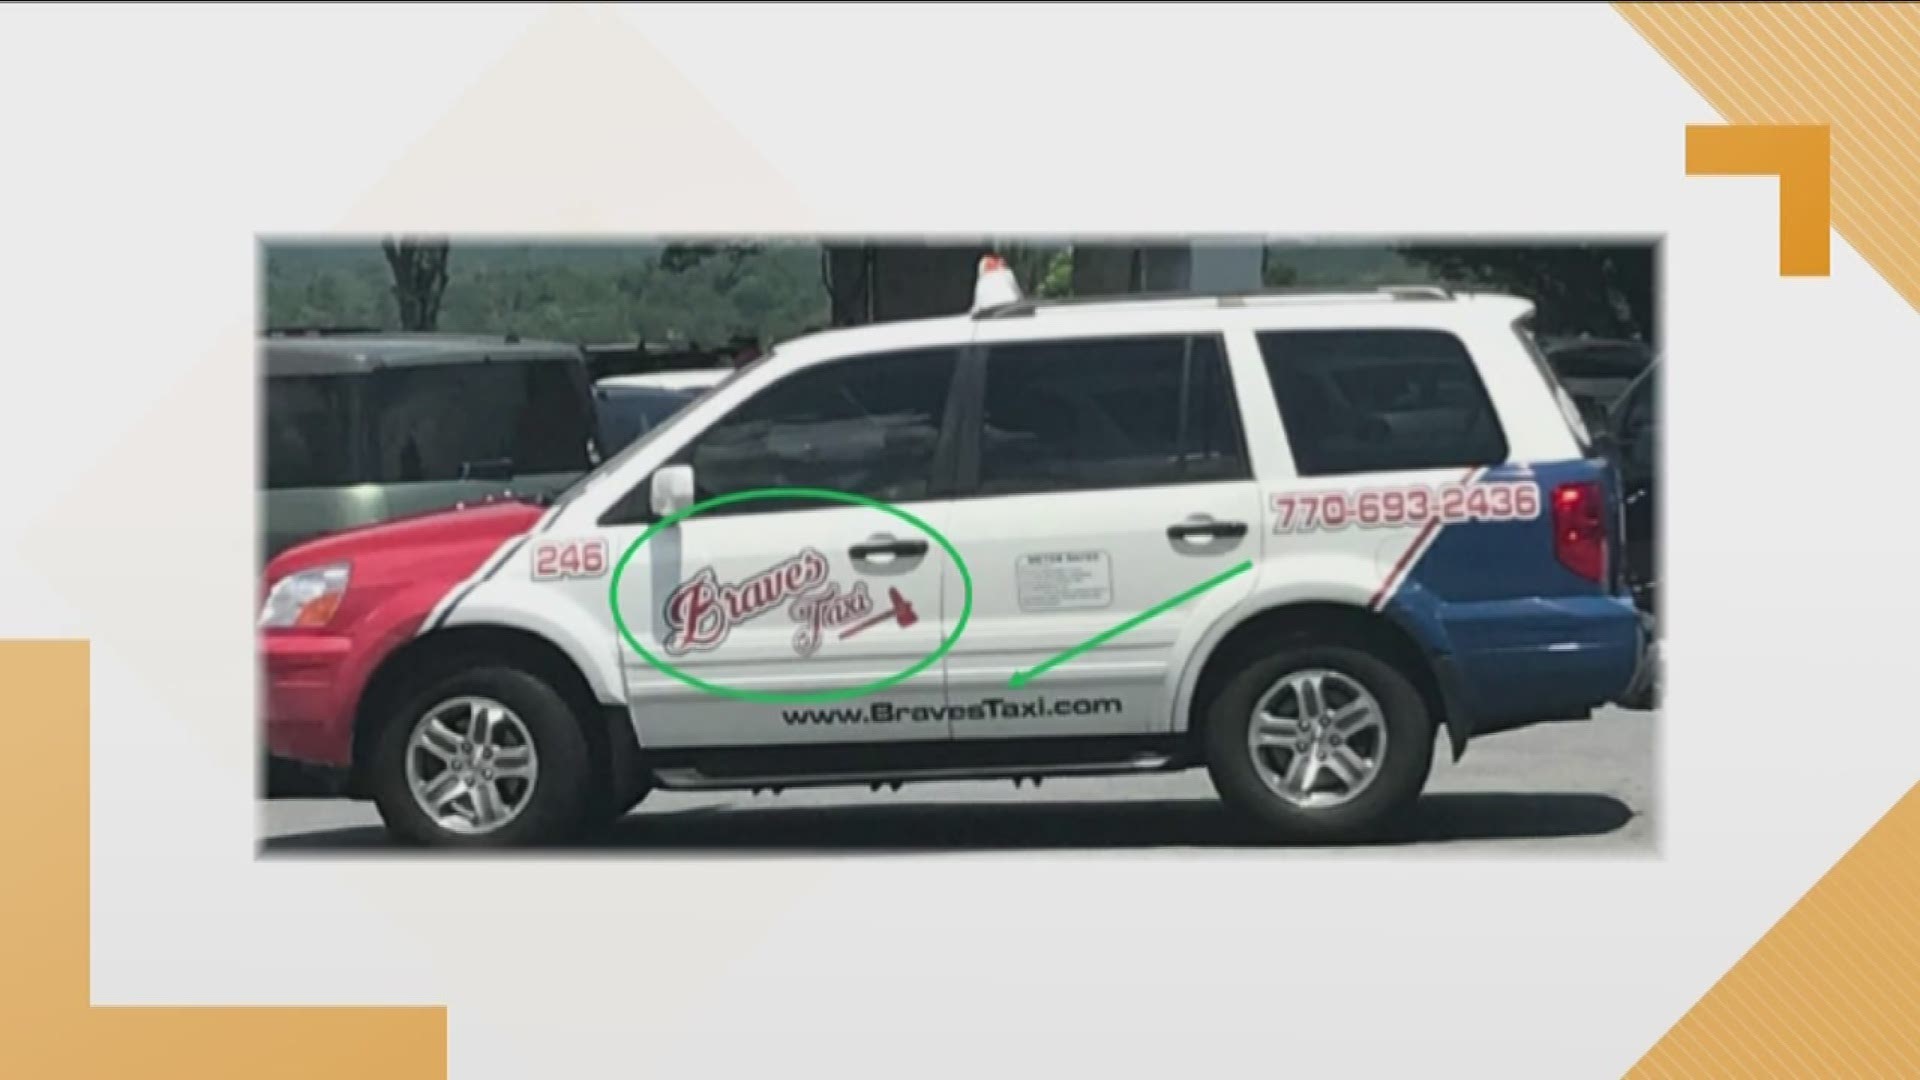 The Braves are suing a Marietta taxi company for riding around with its trademarked logo on its cabs.